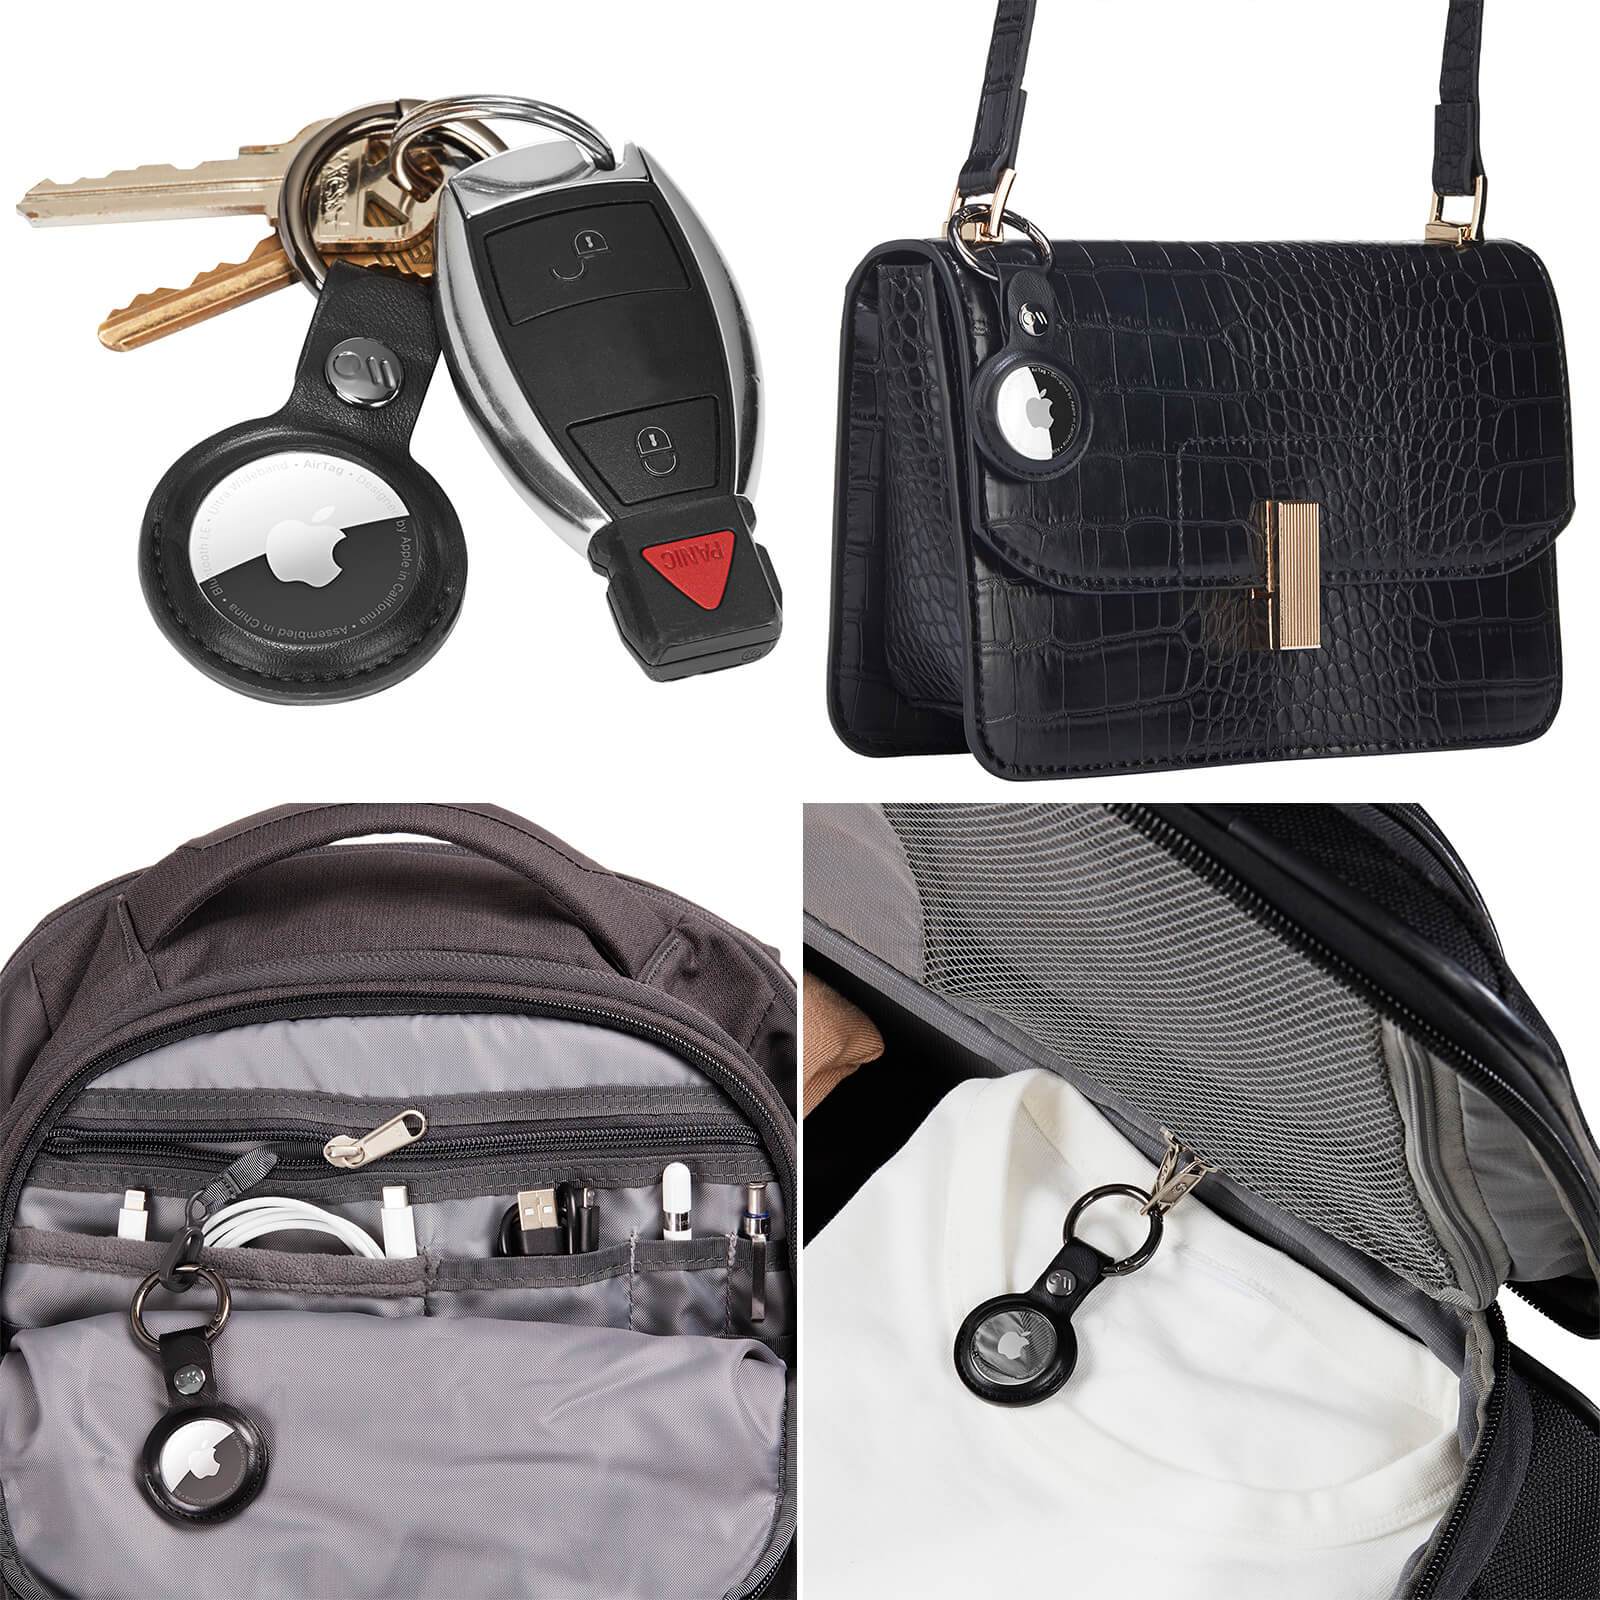 AirTag Keychain Case attached to keys, purse, backpack, luggage. color::Black